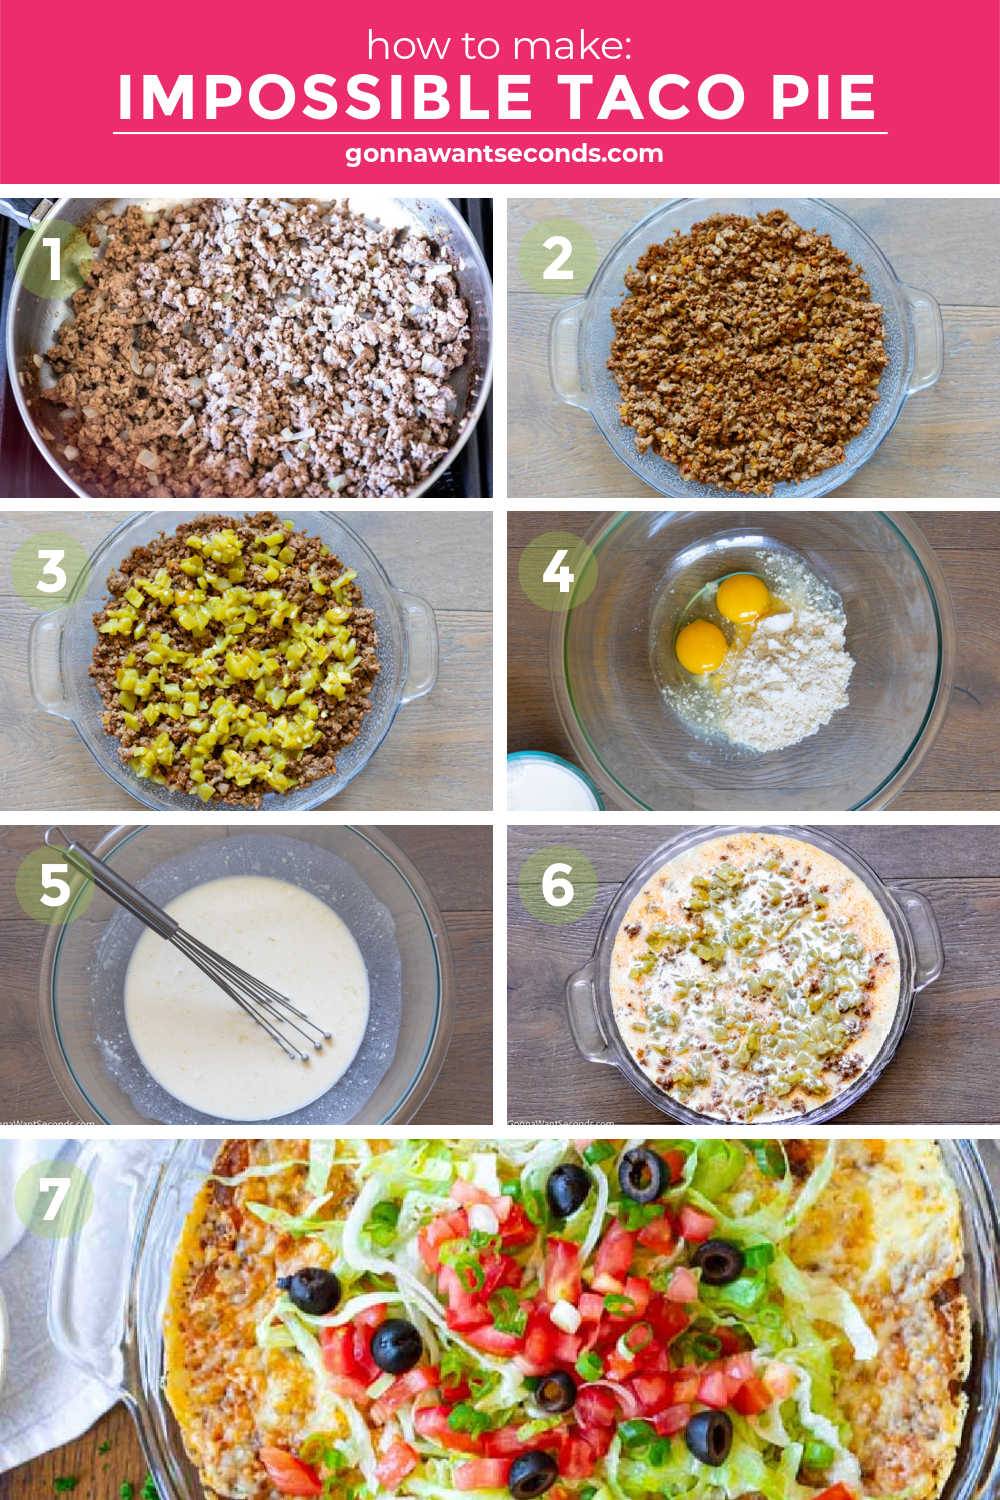 Step by step how to make Bisquick Impossible Taco Pie